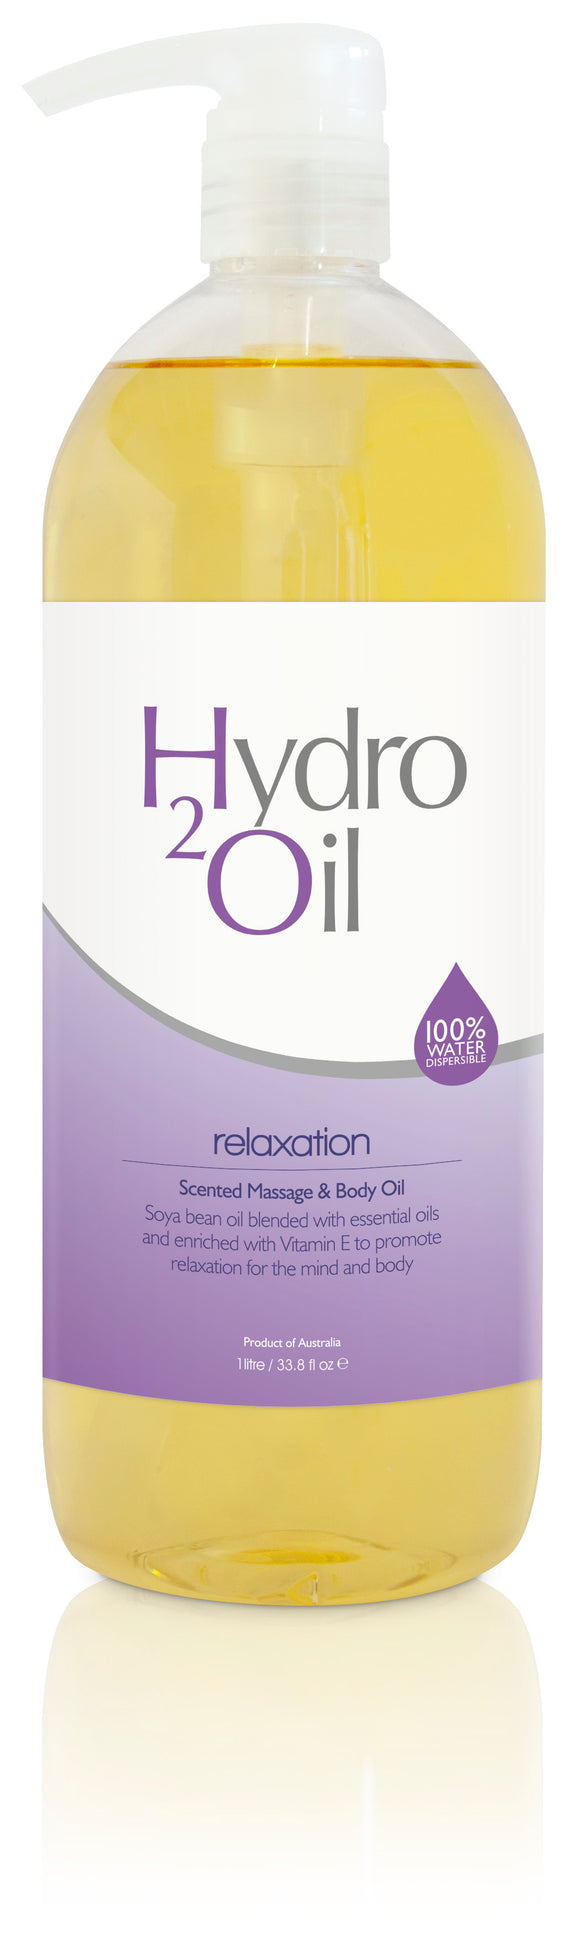 Caron Hydro2 Oil Relaxation - 1ltr